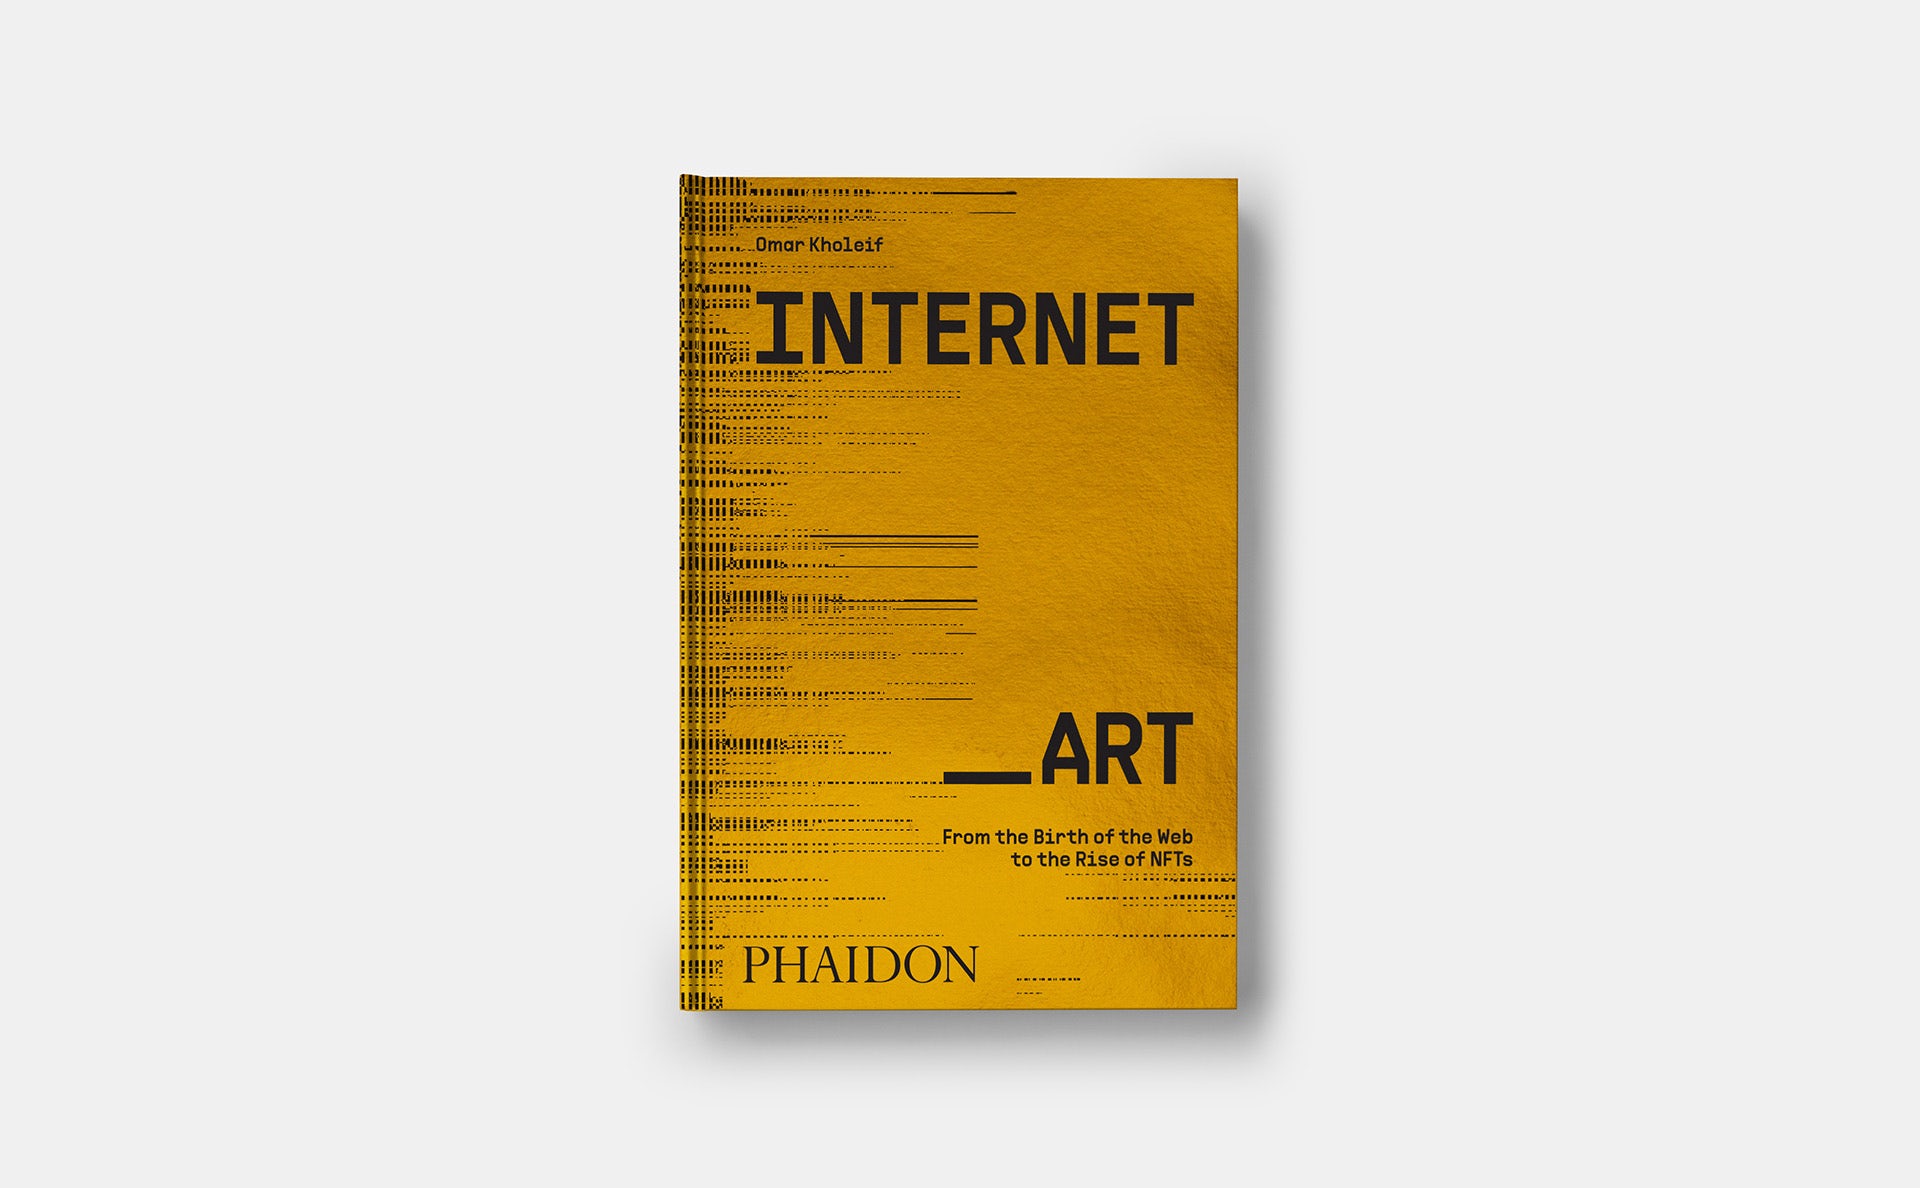 Image shows the golden book cover of Internet Art by Omar Kholeif